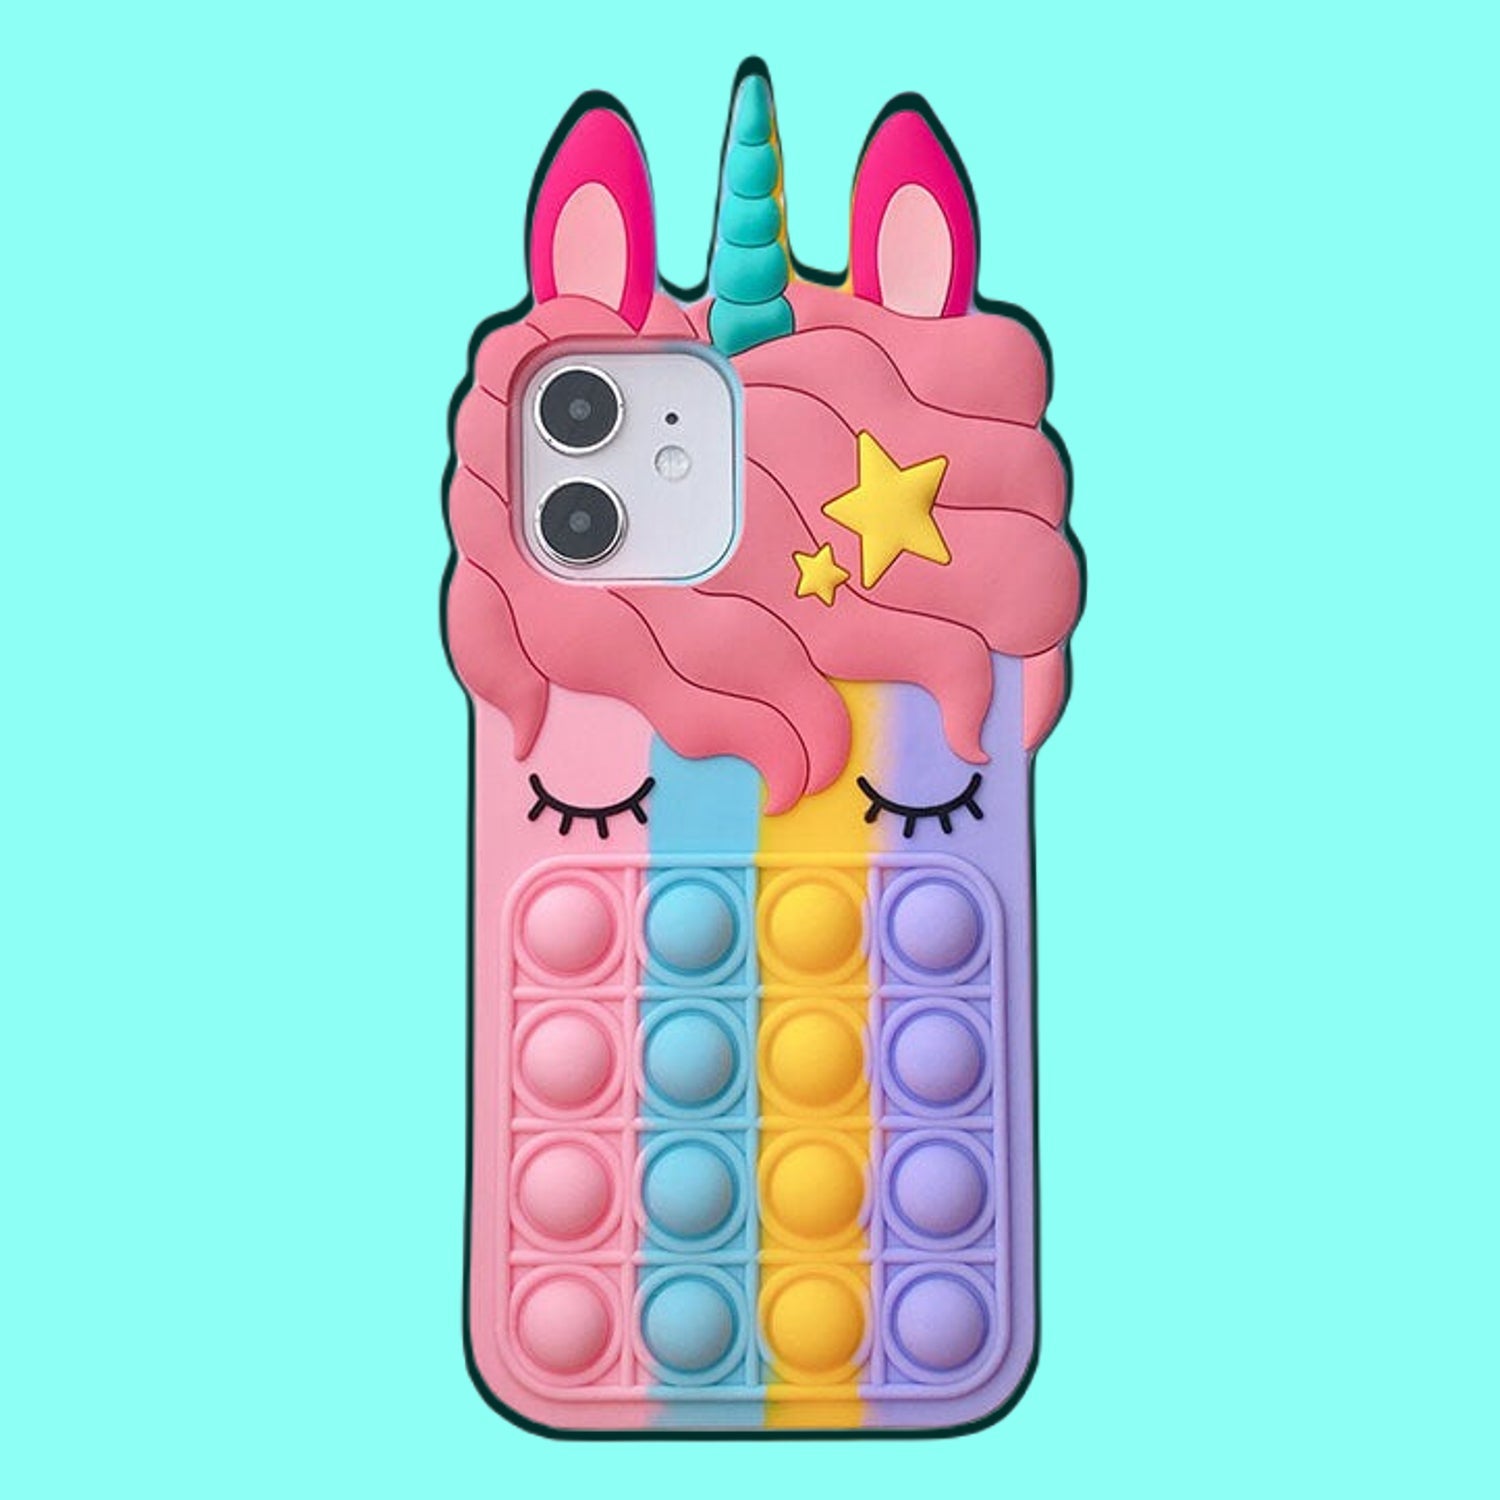 omgkawaii Mobile Phone Cases iPhone X Unicorn Pop It Phone Case for iPhone